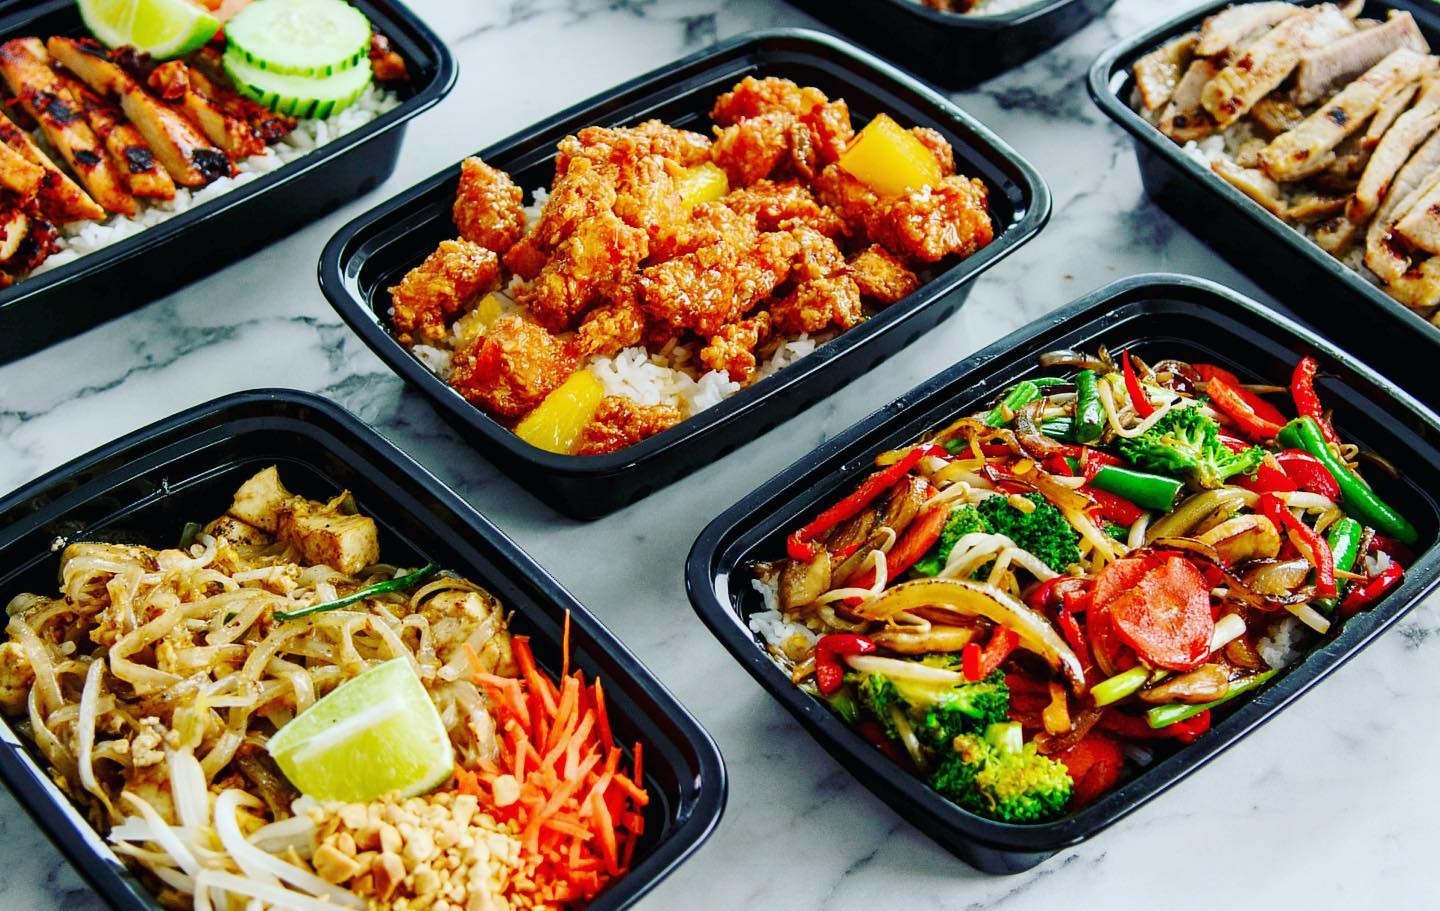 Meals to Go